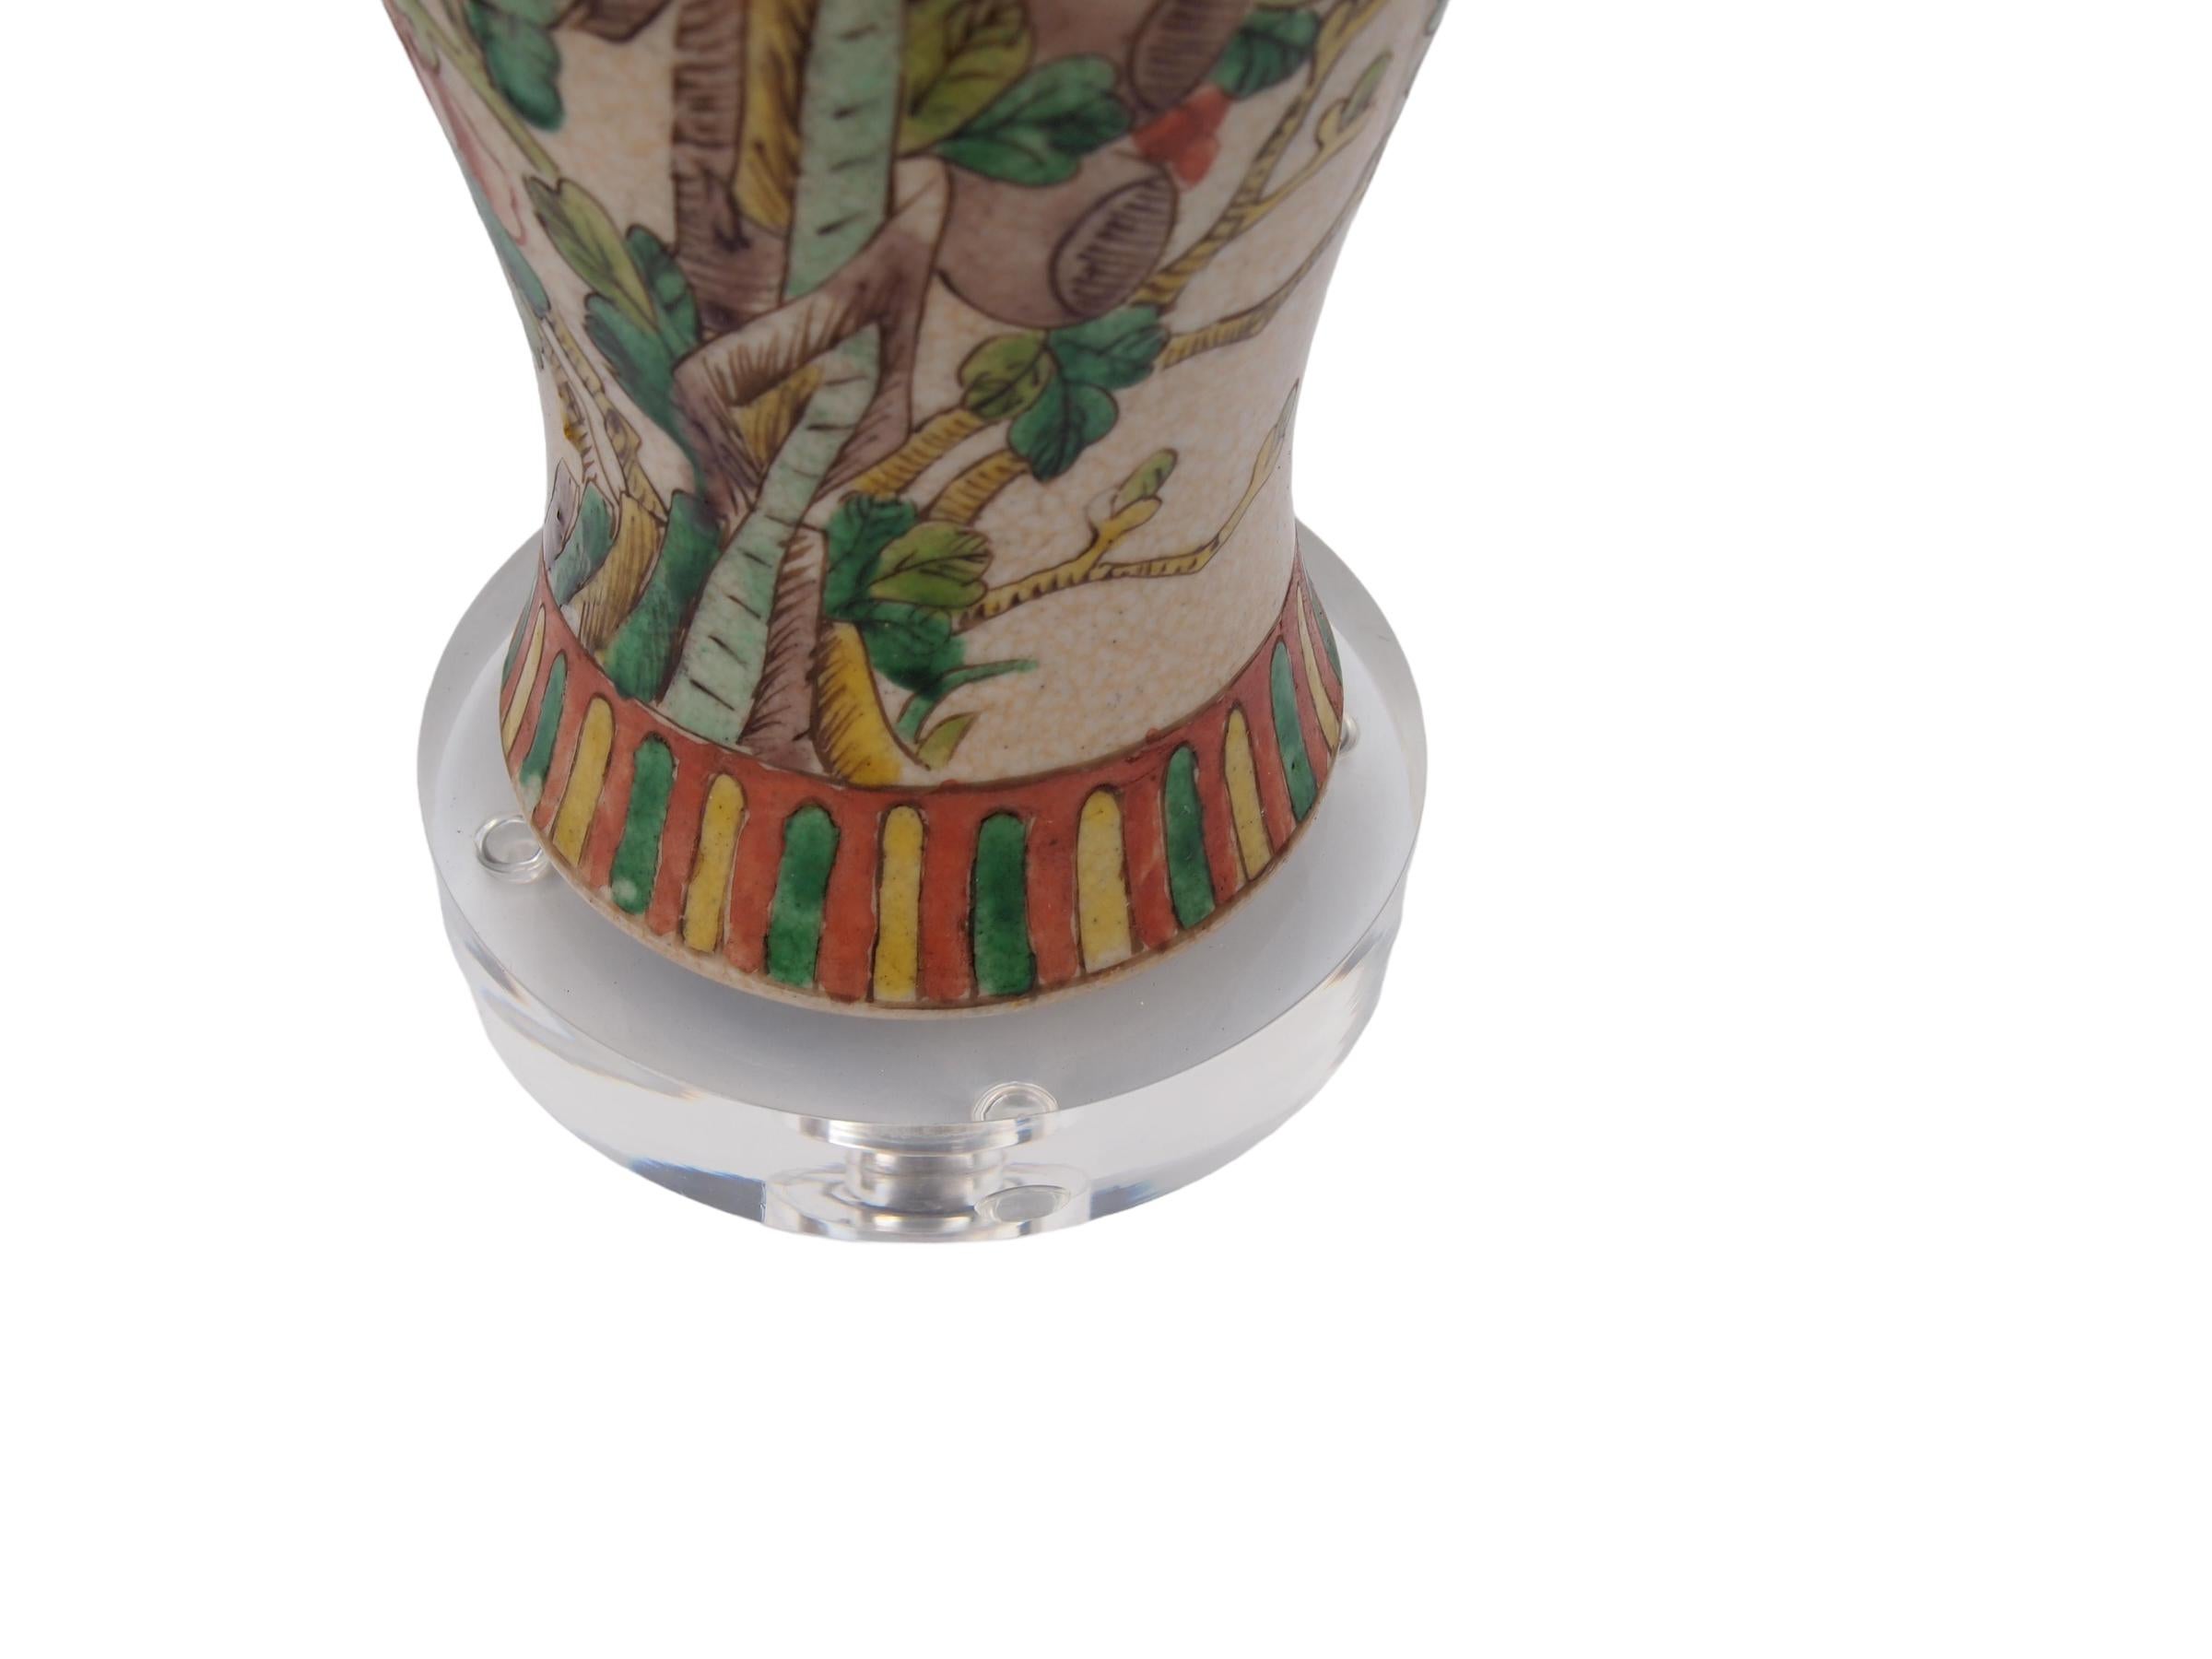 Pair of early 20th Century Chinese porcelain vases custom mounted on lucite bases. Each vase decorated with a perched birds  of paradise and colorful vegetation on a brown ground.
Wired and in working condition.
Height to bottom of harp 17